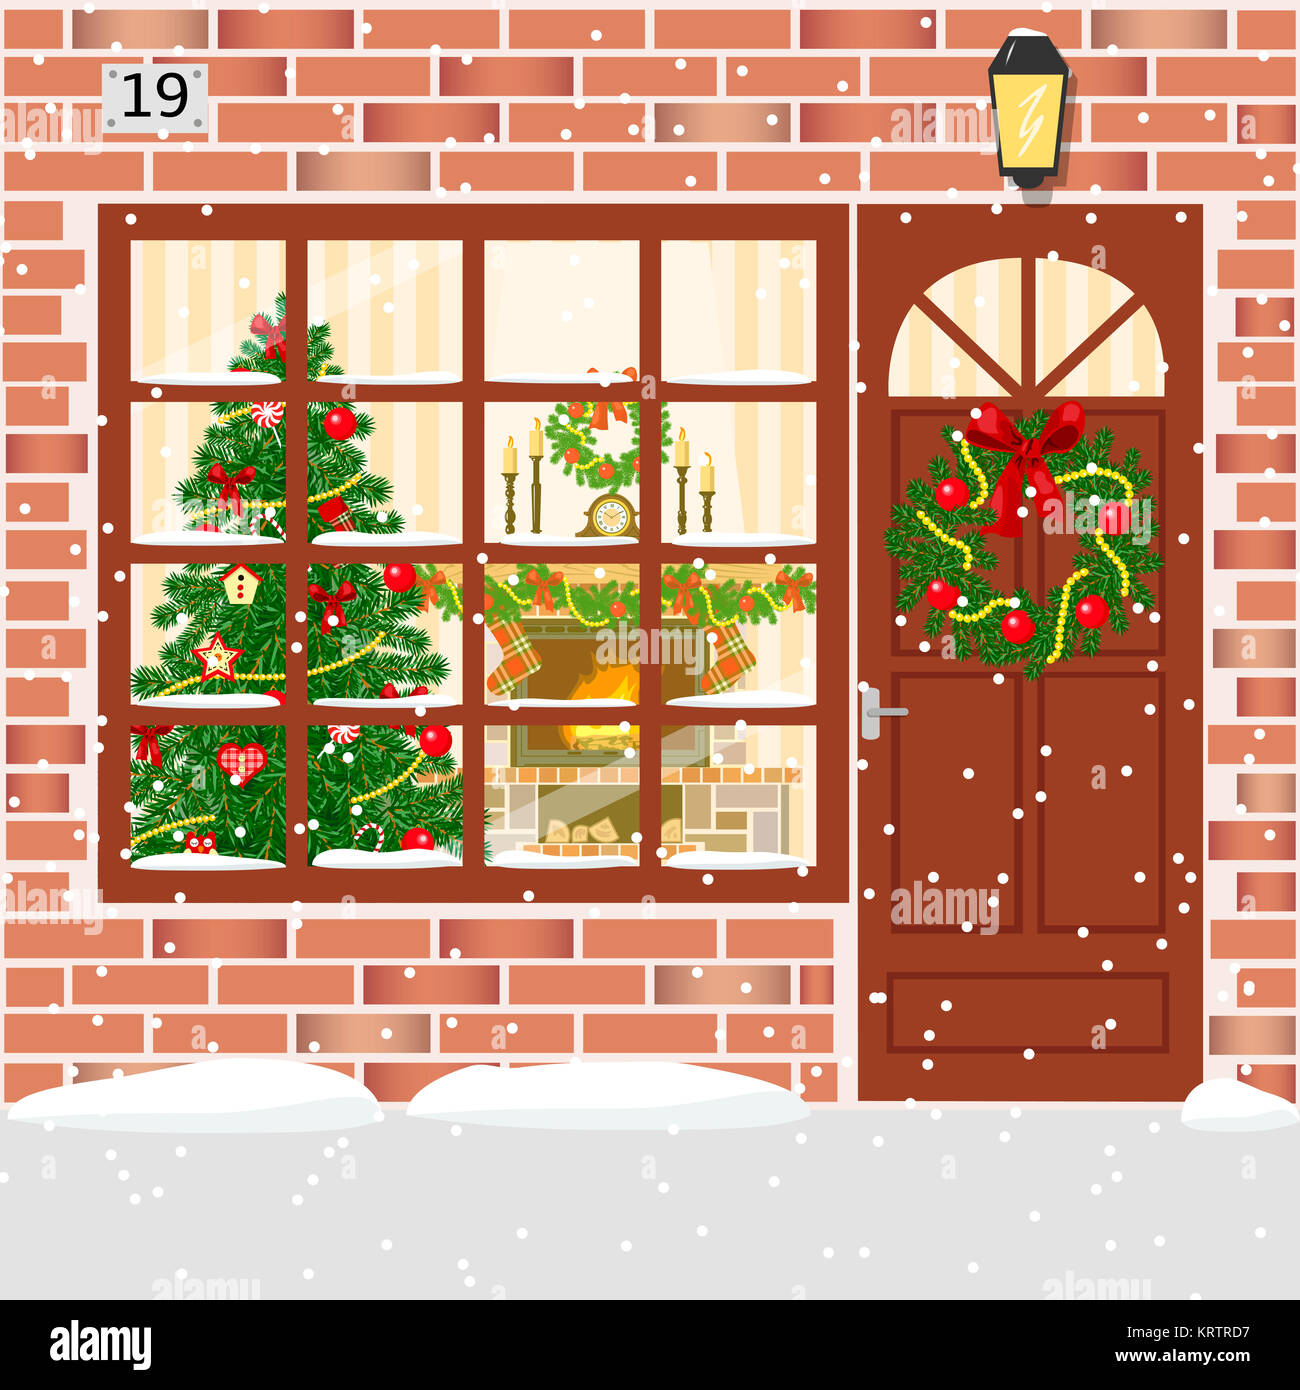 Christmas decorated door, house entrance with wreath Stock Photo